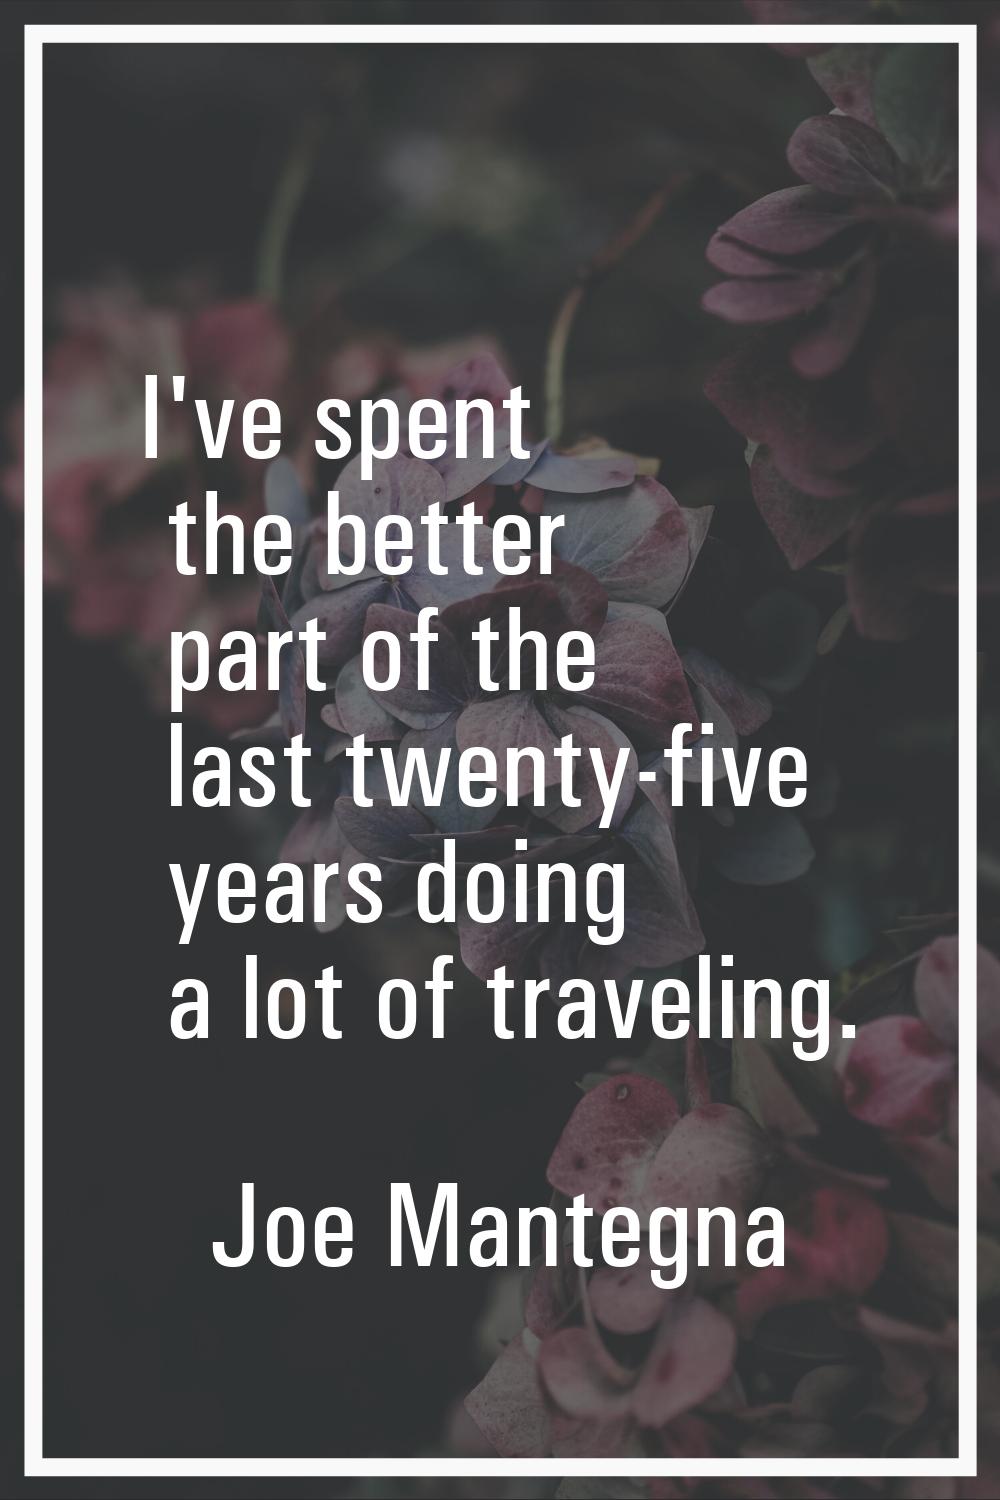 I've spent the better part of the last twenty-five years doing a lot of traveling.